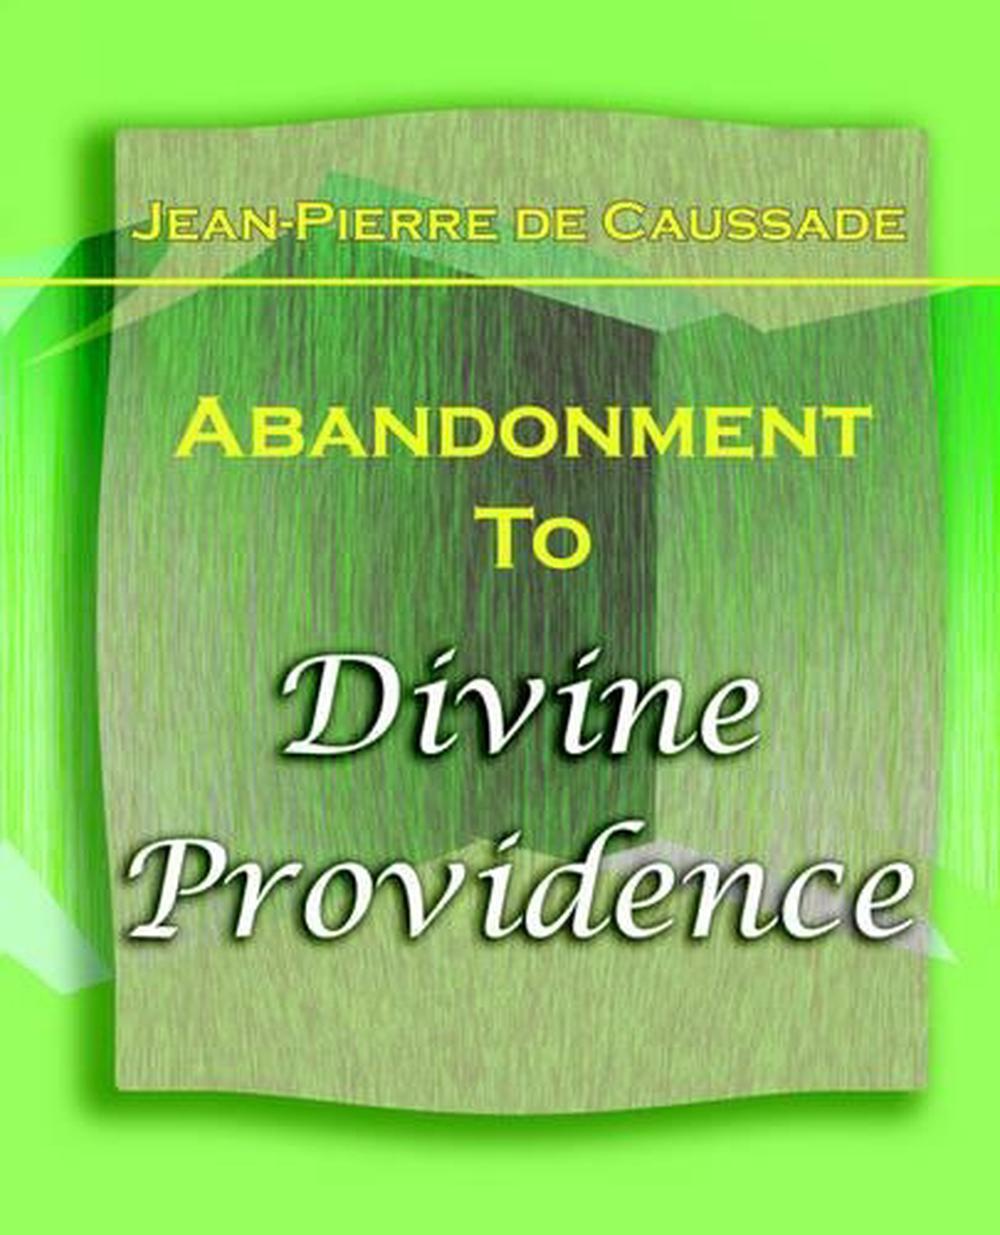 book abandonment to divine providence